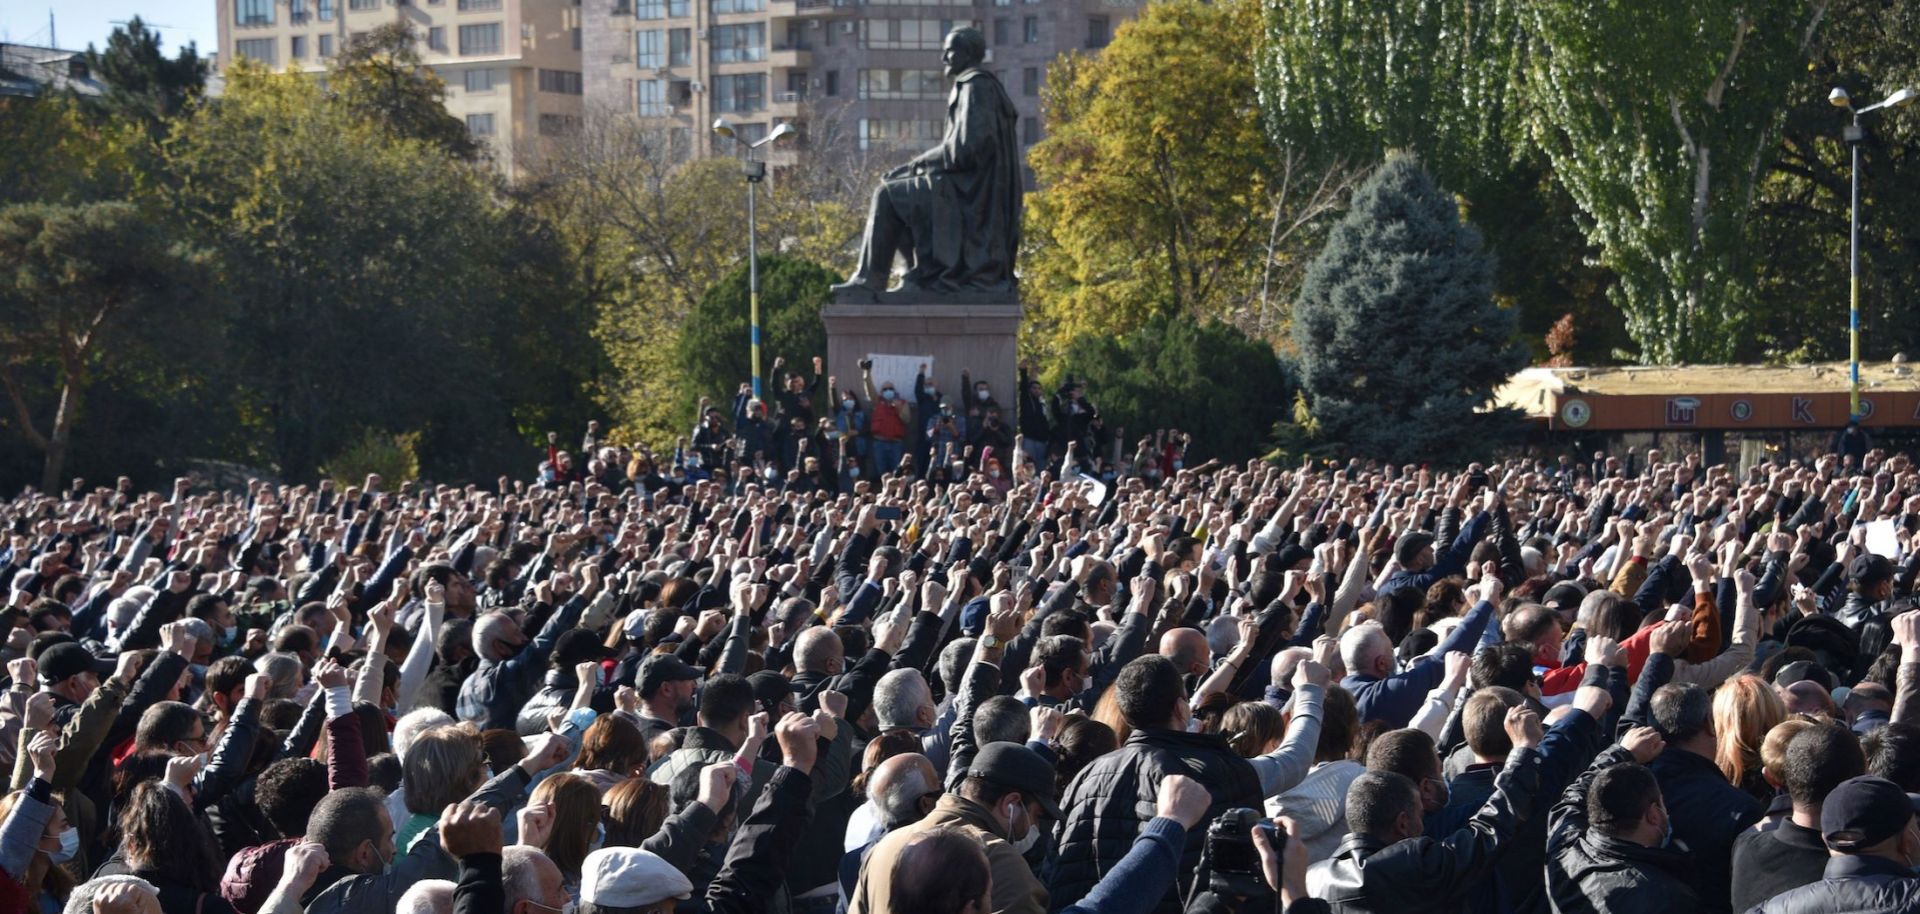 Armenians gather in Yerevan on Nov. 11, 2020, to protest against their country’s agreement to end fighting with Azerbaijan over the disputed Nagorno-Karabakh region.